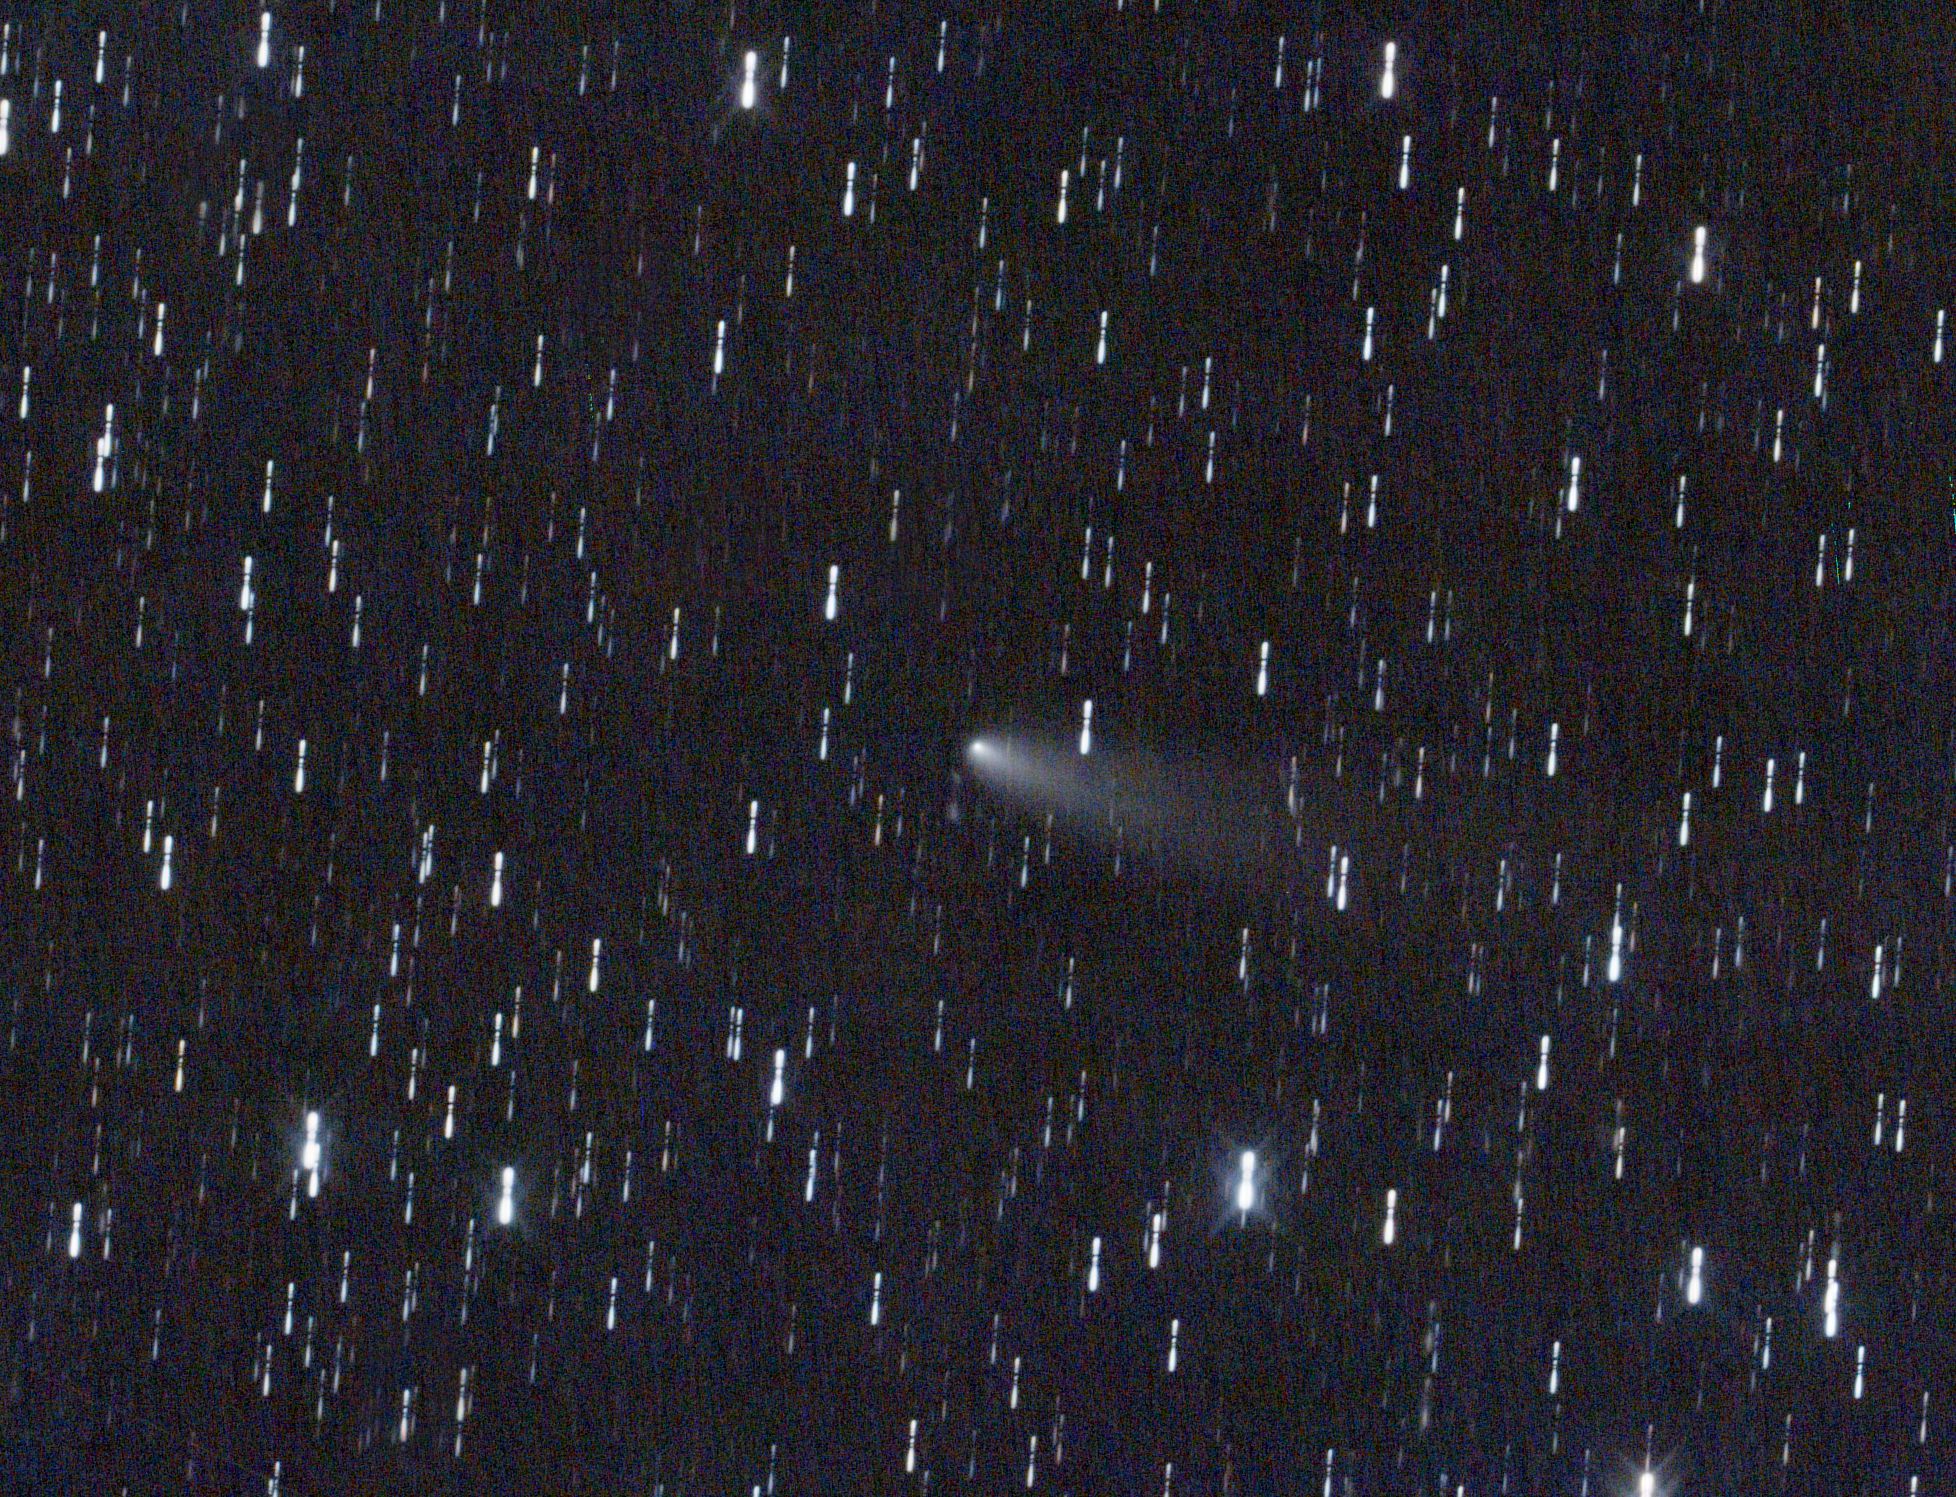 C/2007Q3 Siding Spring <Click to enlarge>